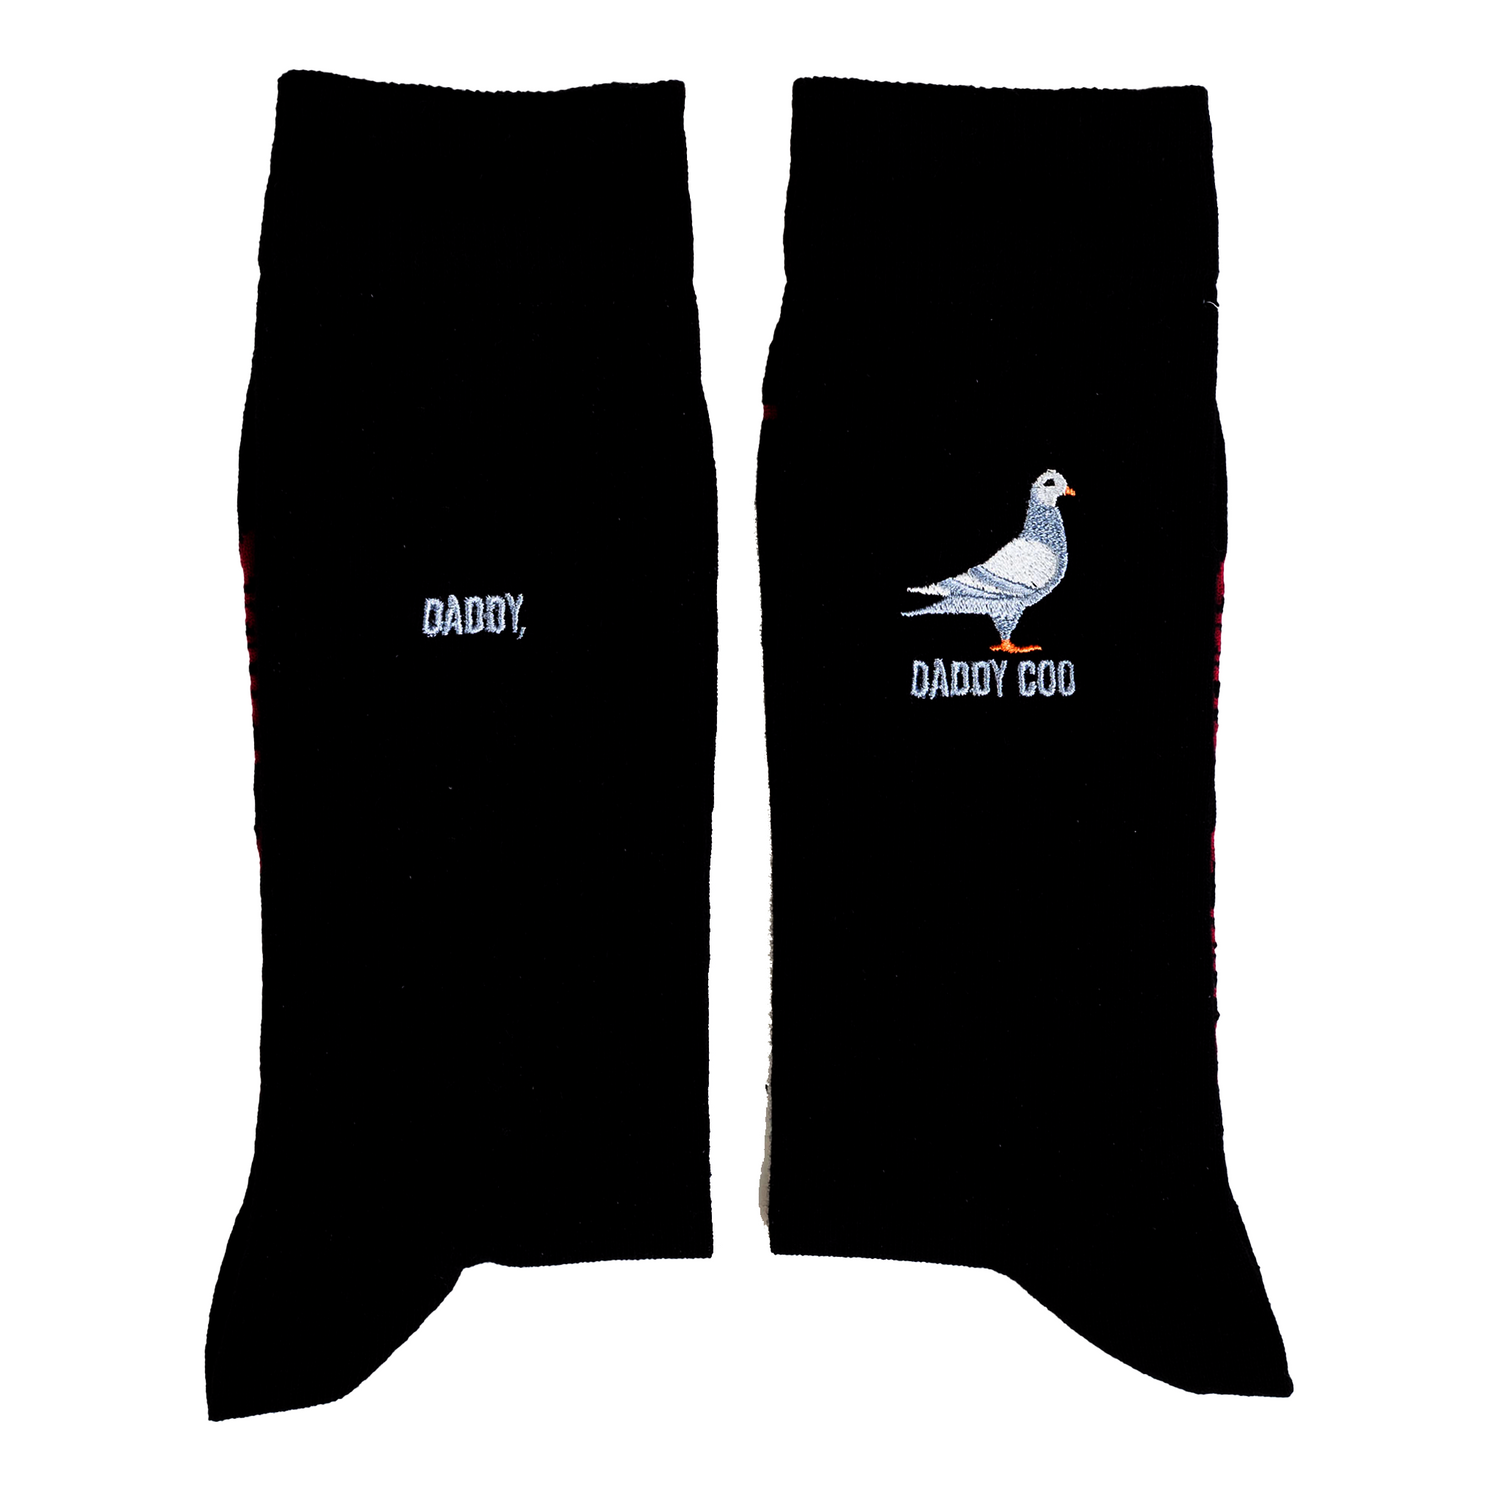 Daddy Coo Premium Embroidery Socks